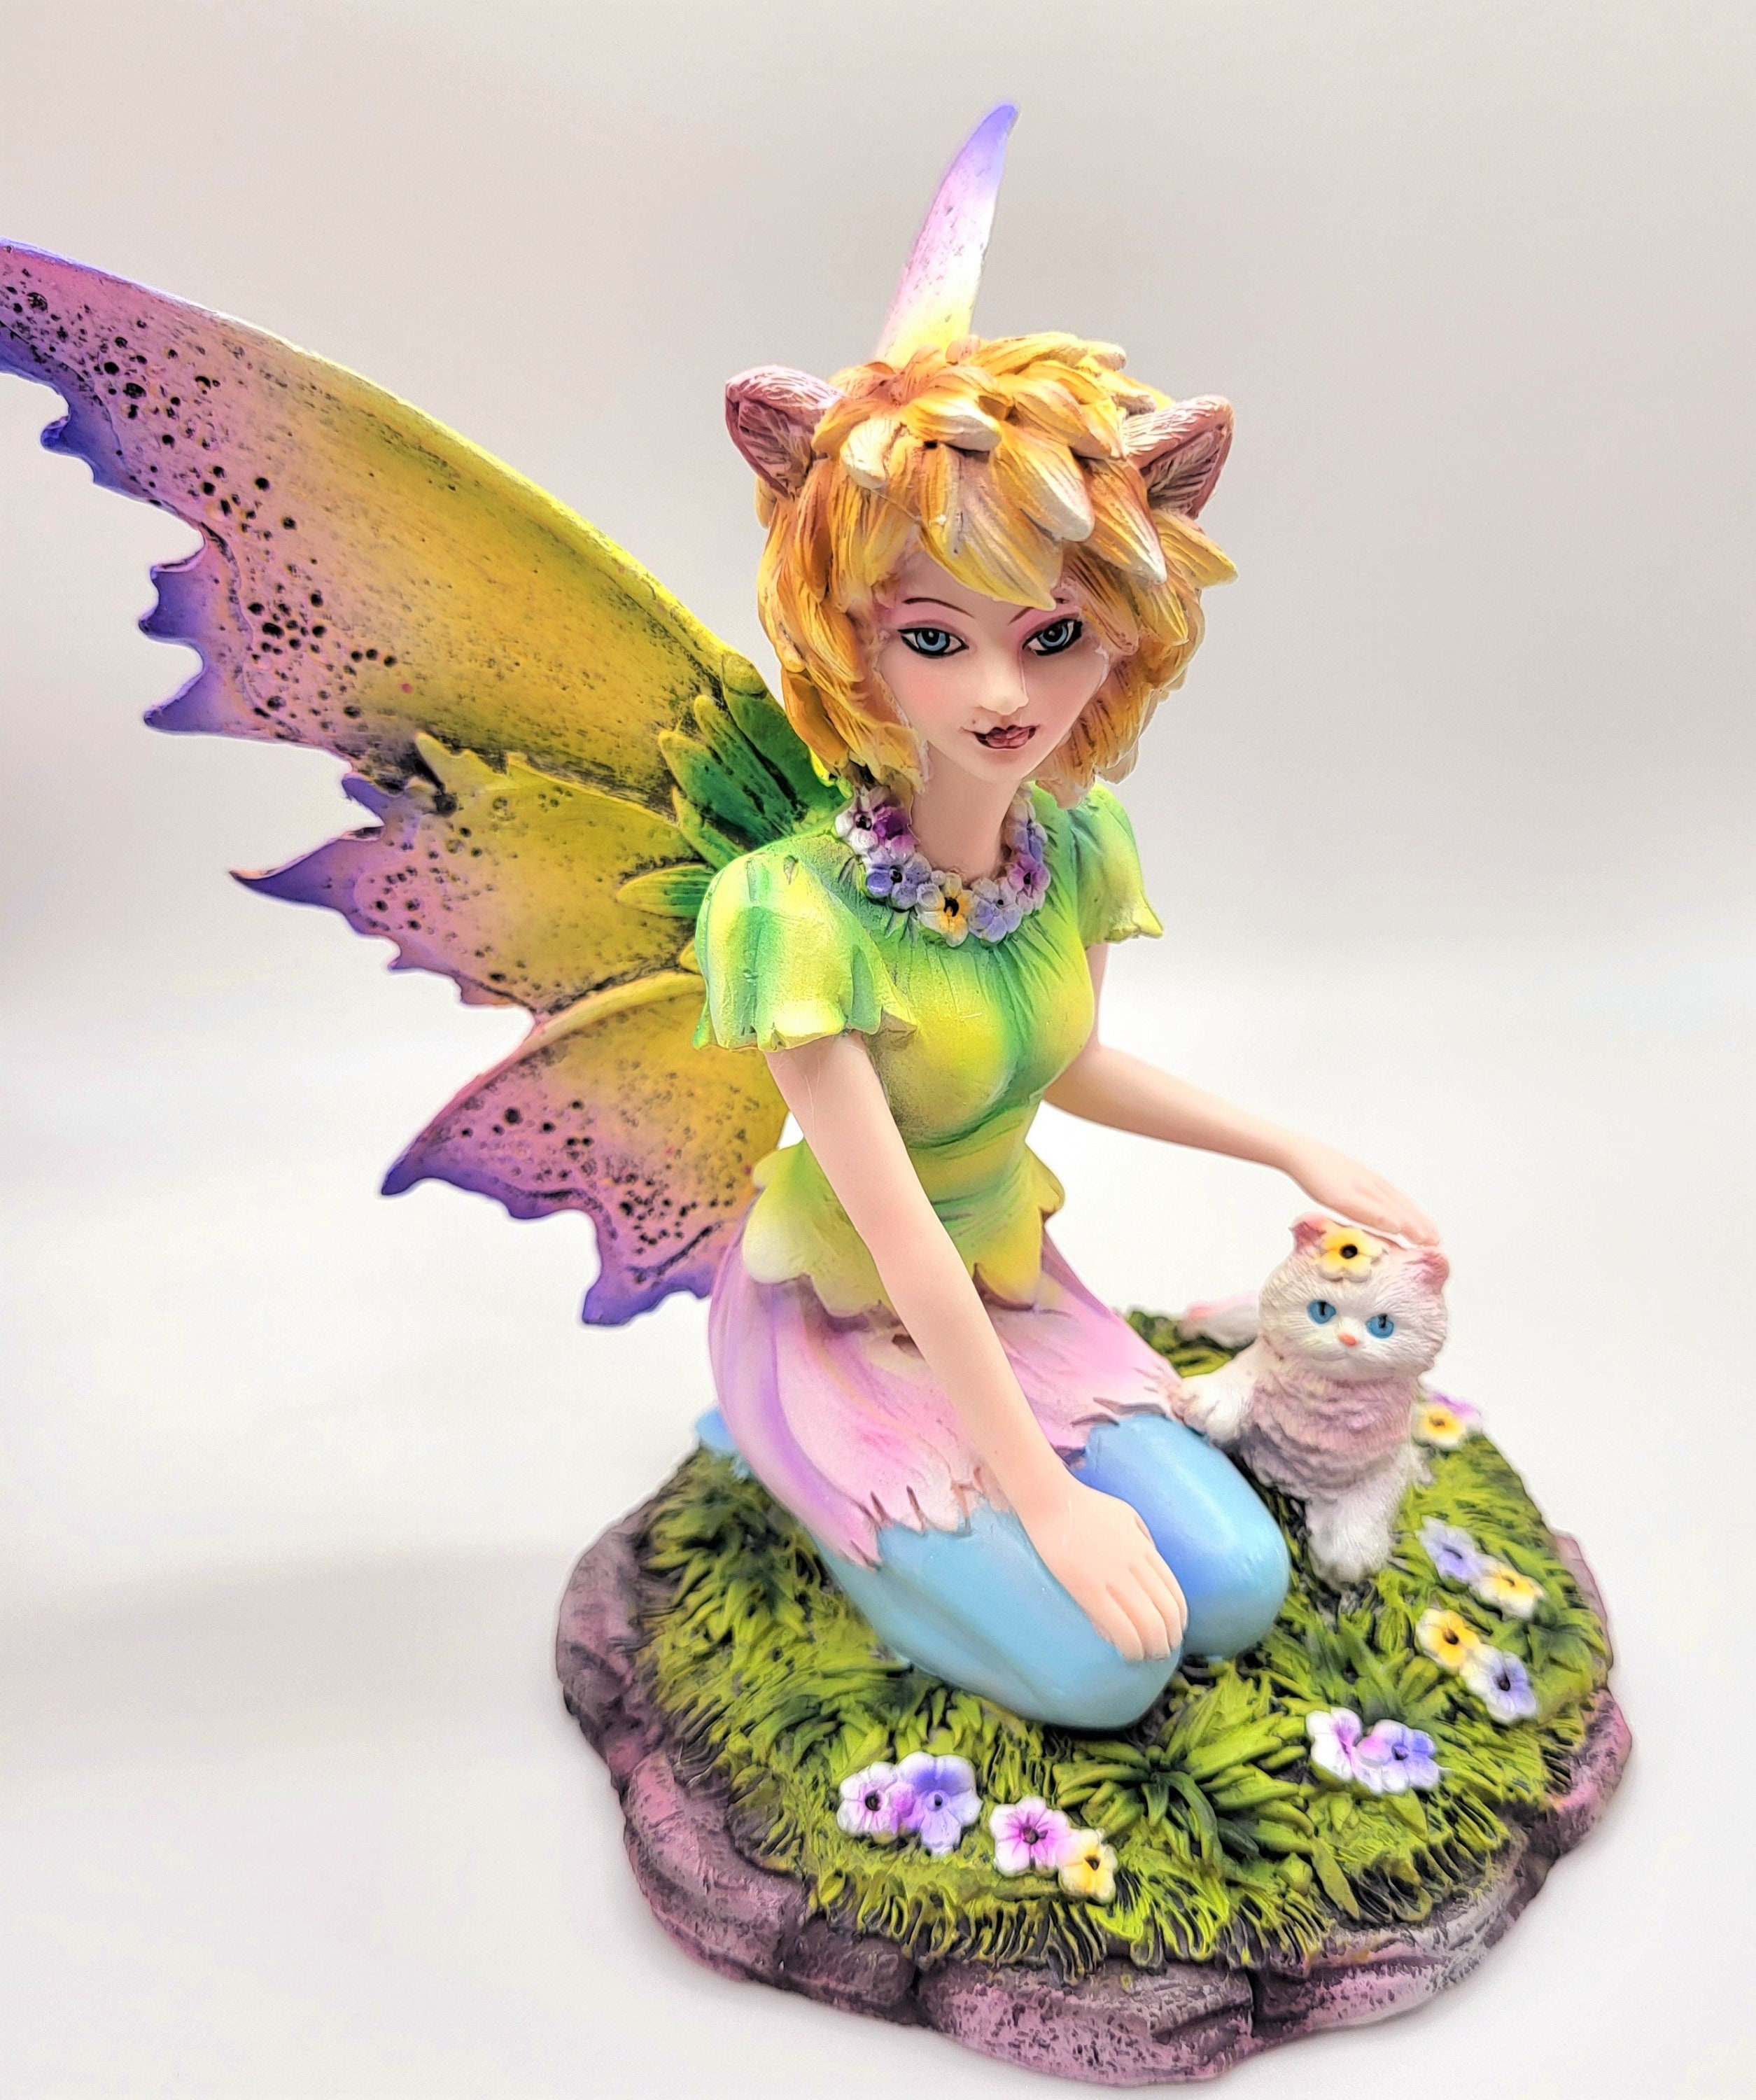 Pretty Blond Fairy with White Cat Kneeling on a Bed of Green Leaves 5 1/4 " Figurine, Fairies, Collectibles, Angels, Knick Knacks